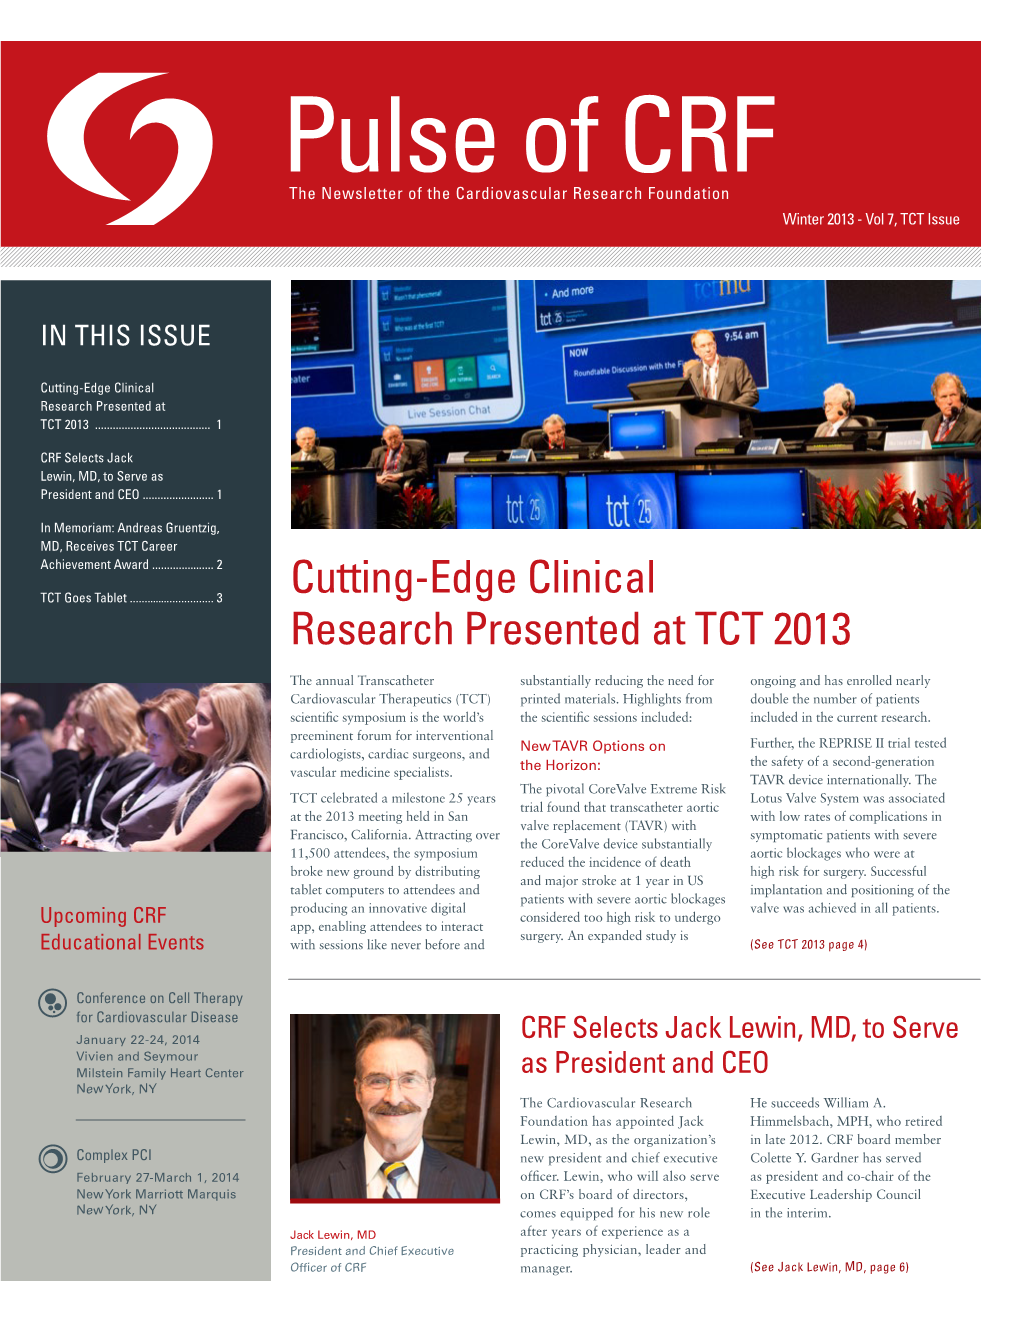 Pulse of CRF the Newsletter of the Cardiovascular Research Foundation Winter 2013 - Vol 7, TCT Issue